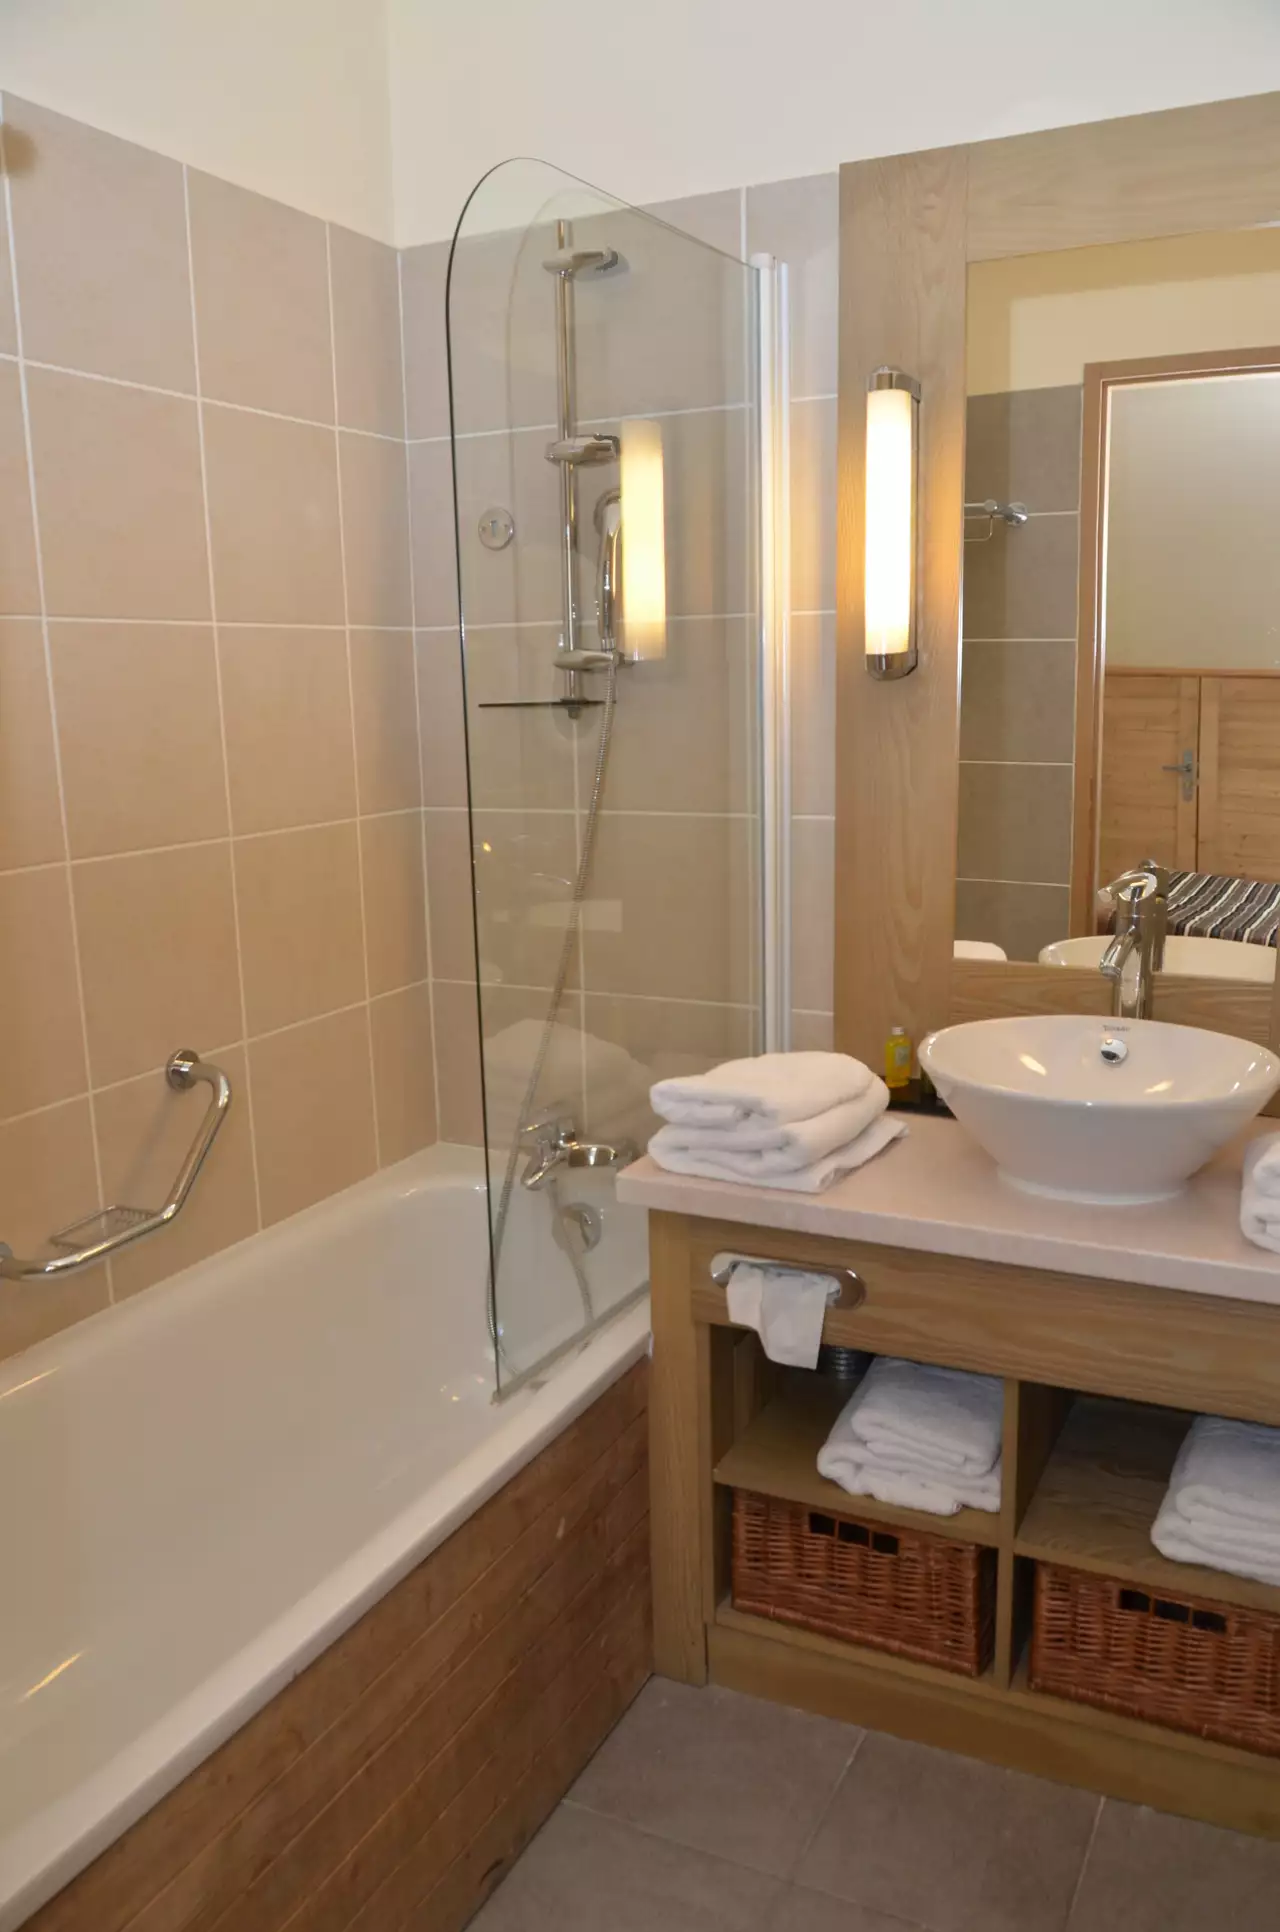 Comfortable apartment  Direct access to the slopes  Pool  Spa  Free and unlimited WIFI 